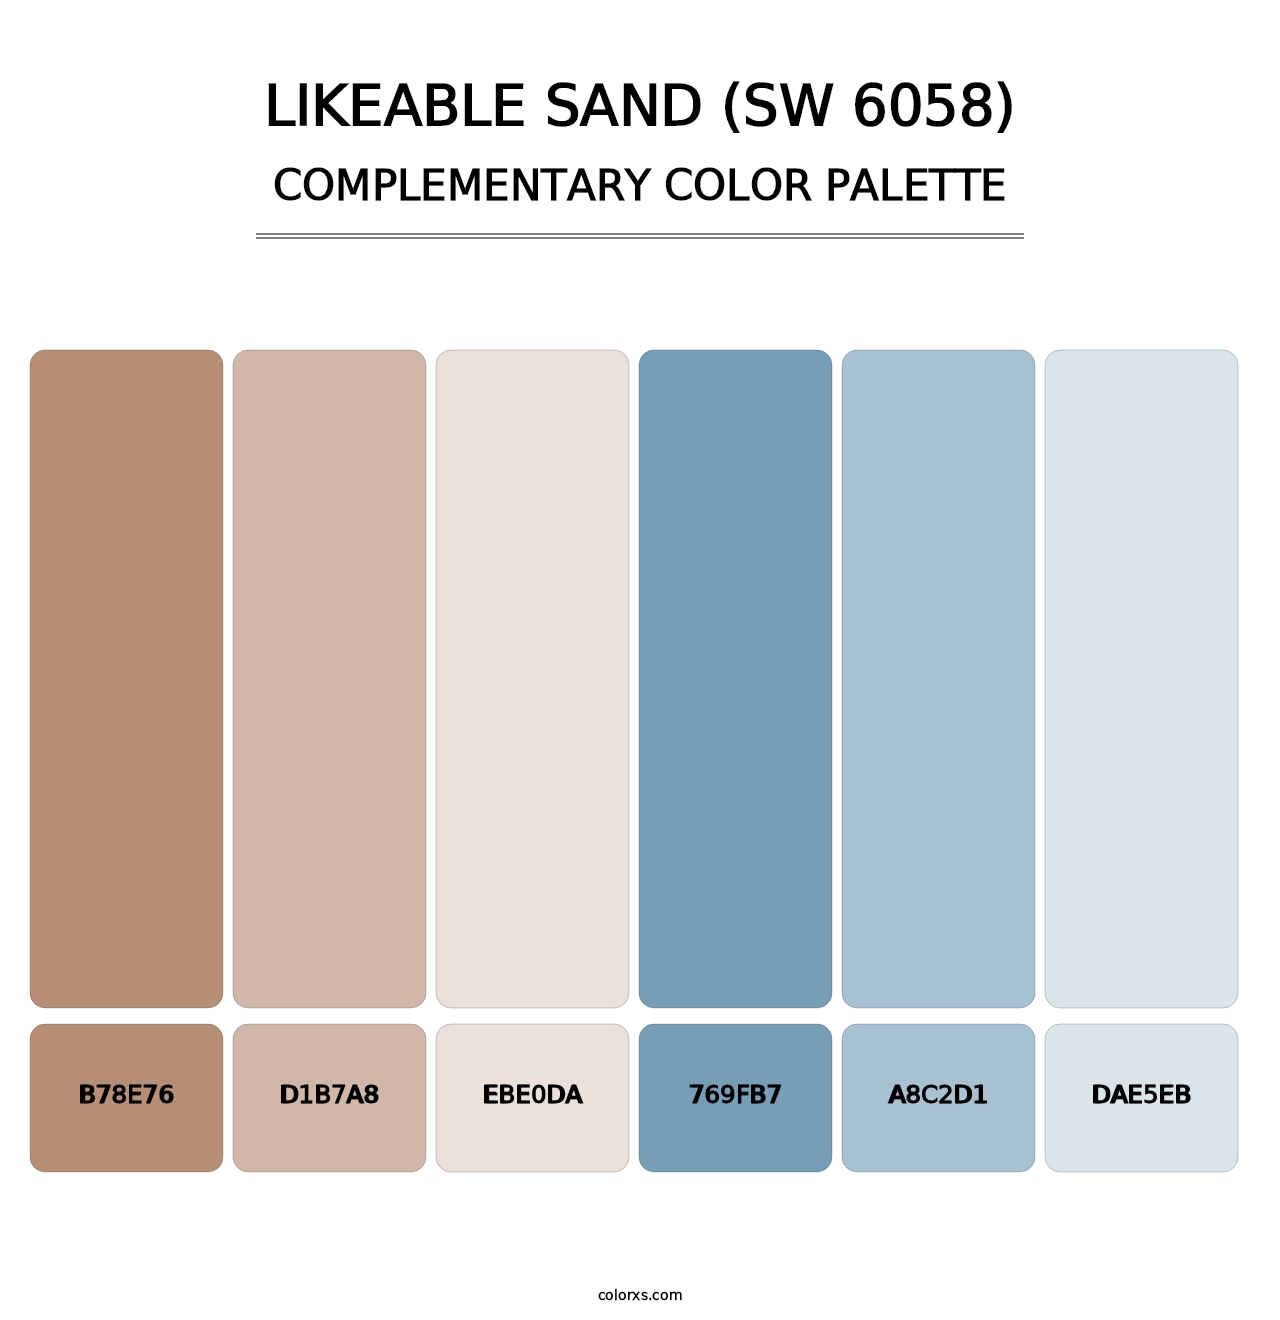 Likeable Sand (SW 6058) - Complementary Color Palette